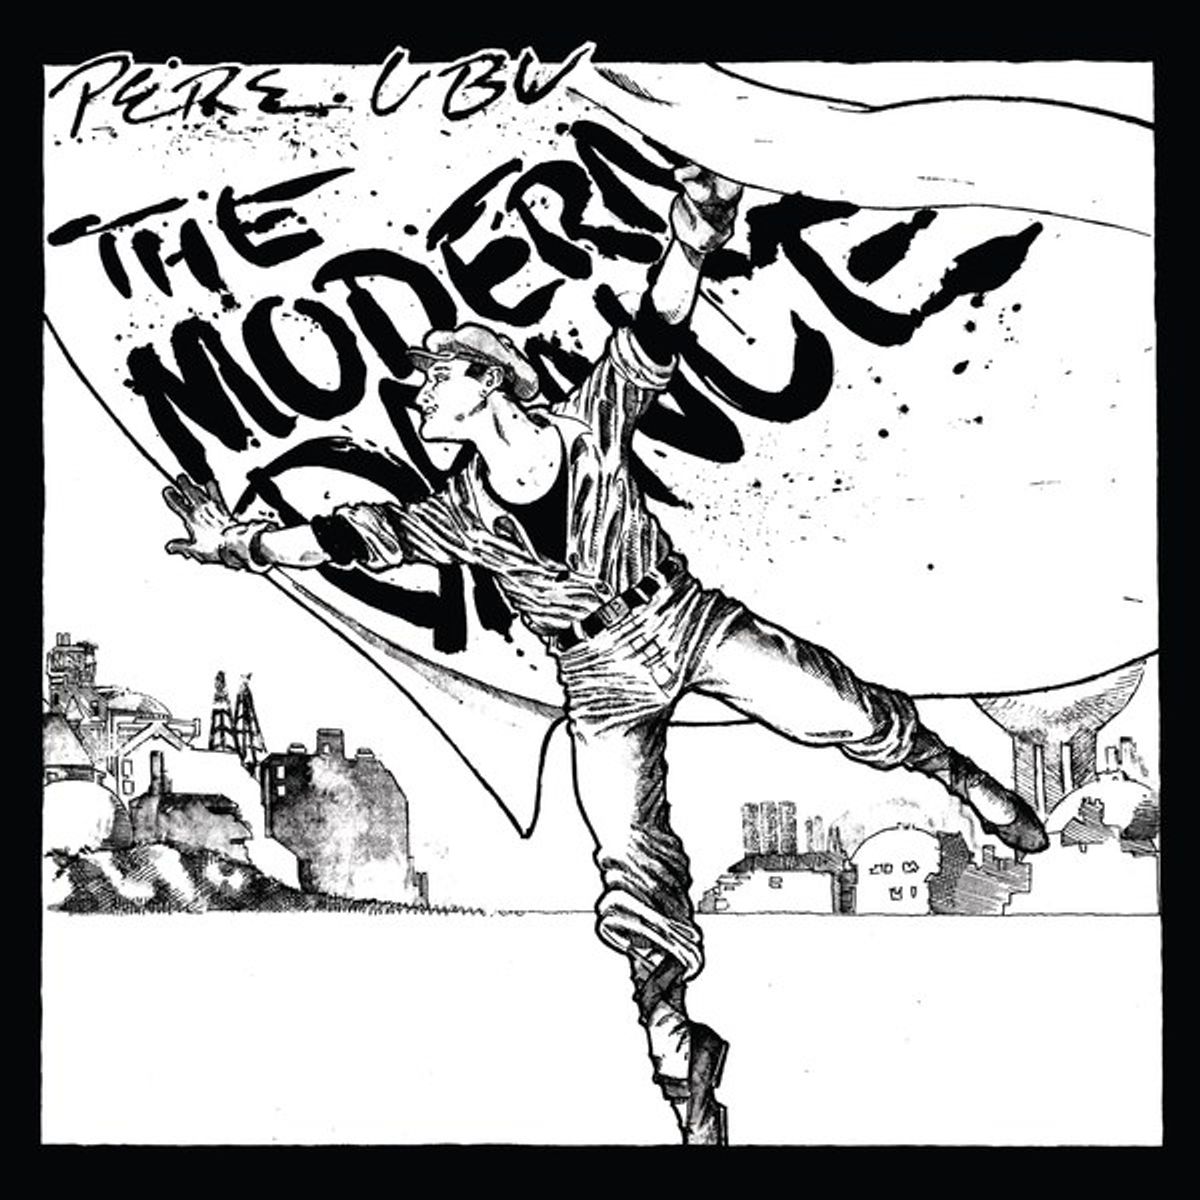 Pere Ubu's 'The Modern Dance': A Look Into The Bizarre